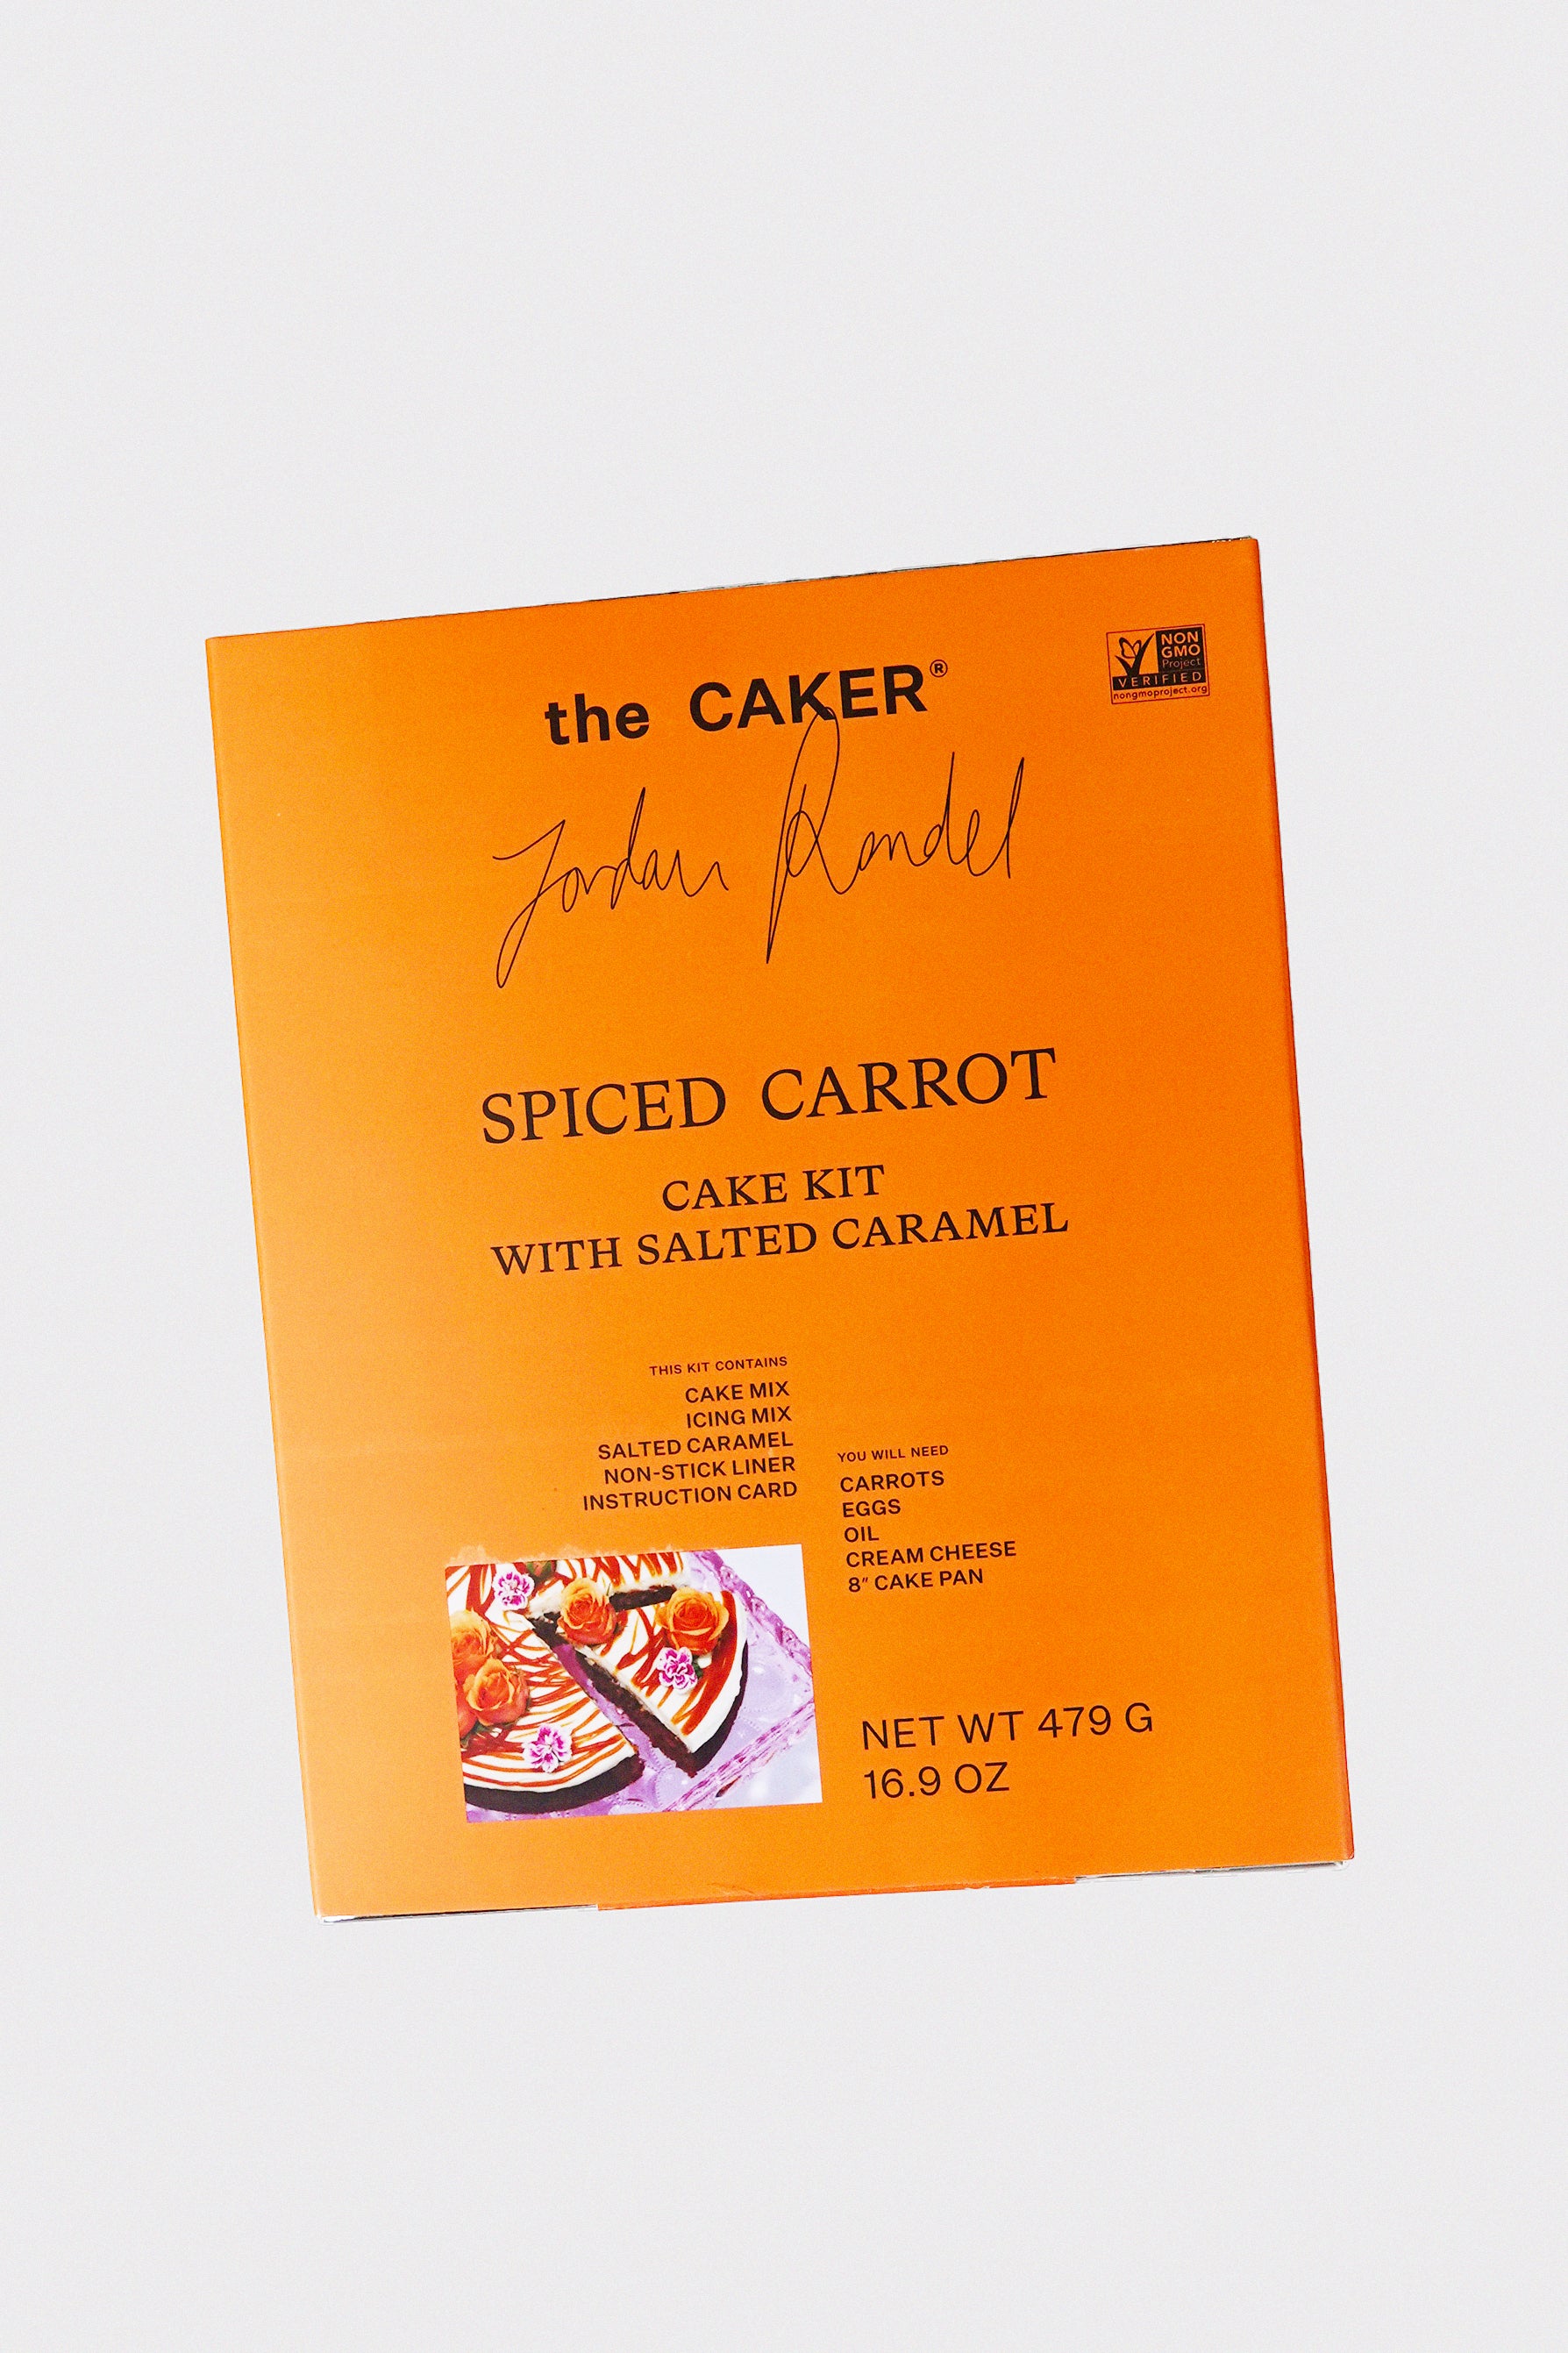 Spiced Carrot with Salted Caramel Cake Kit